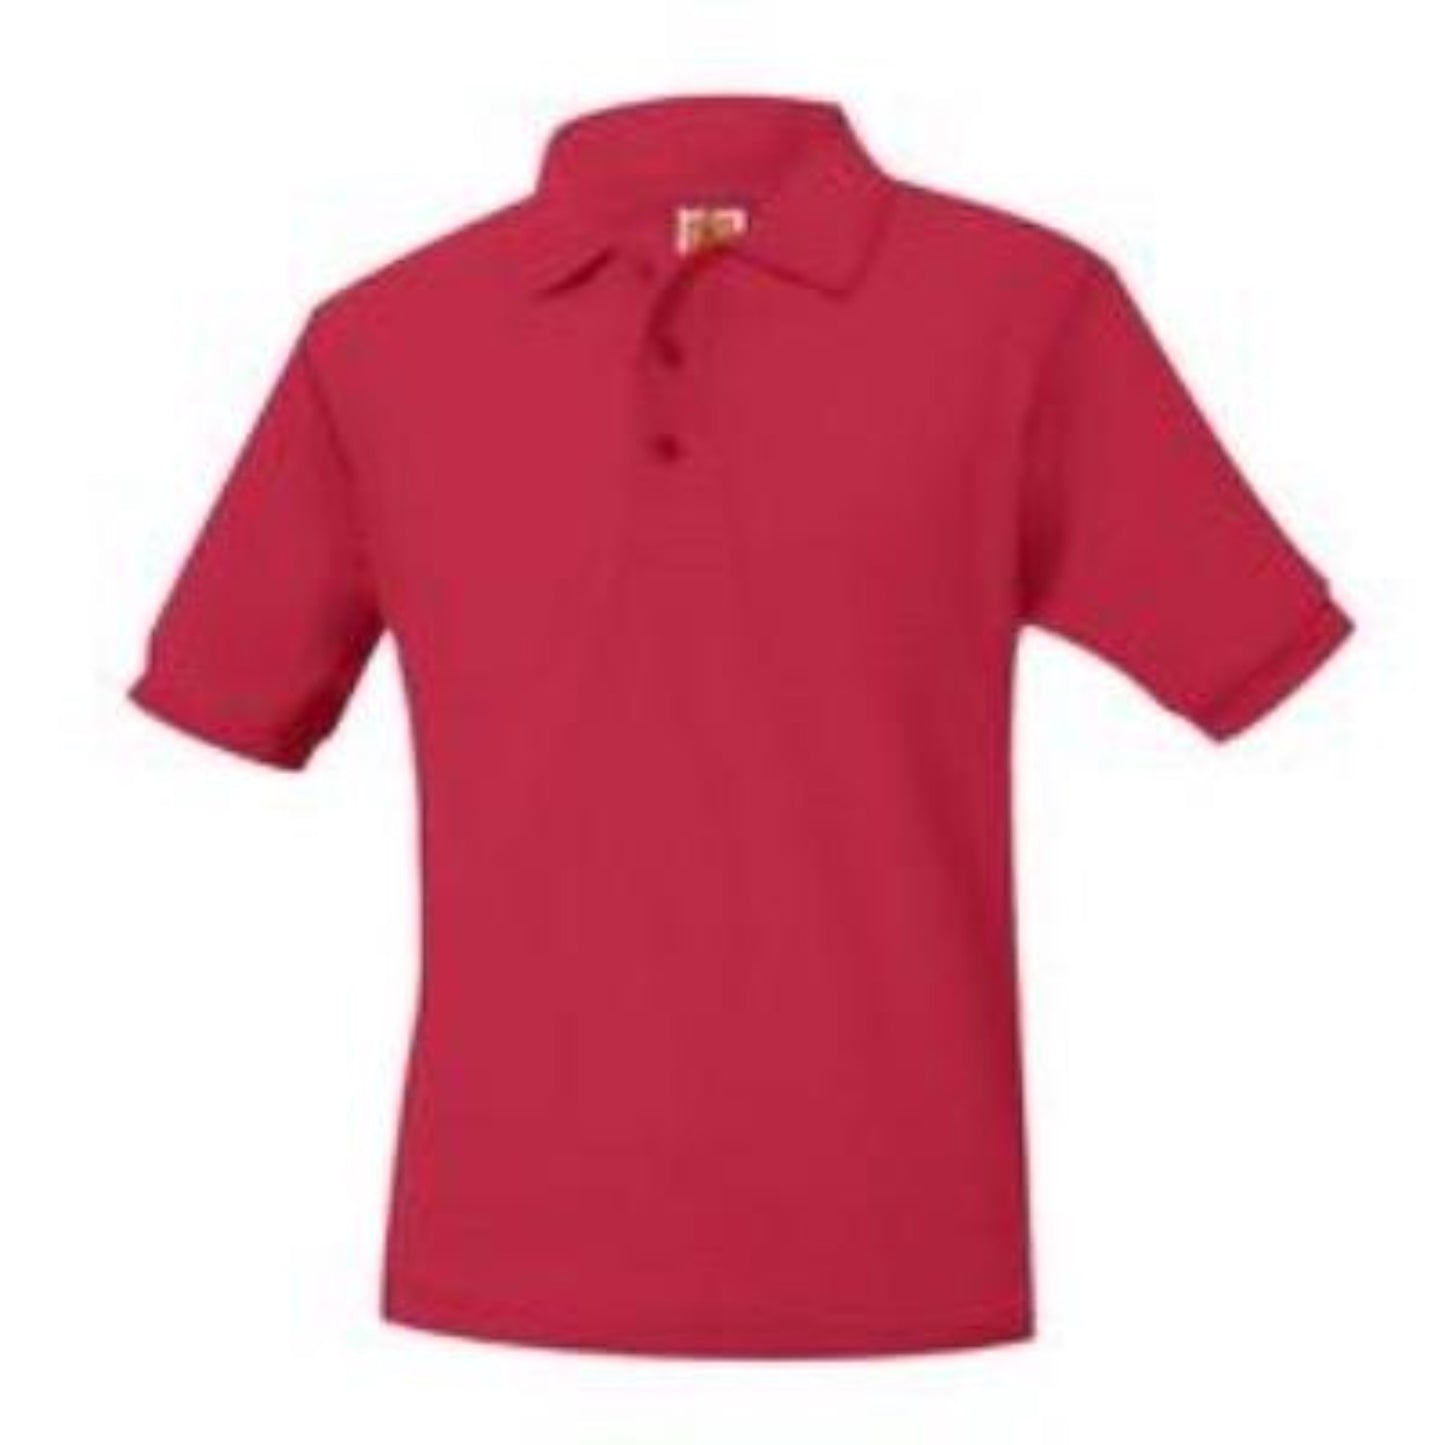 Unisex Short Sleeve Pique Knit Polo-Red